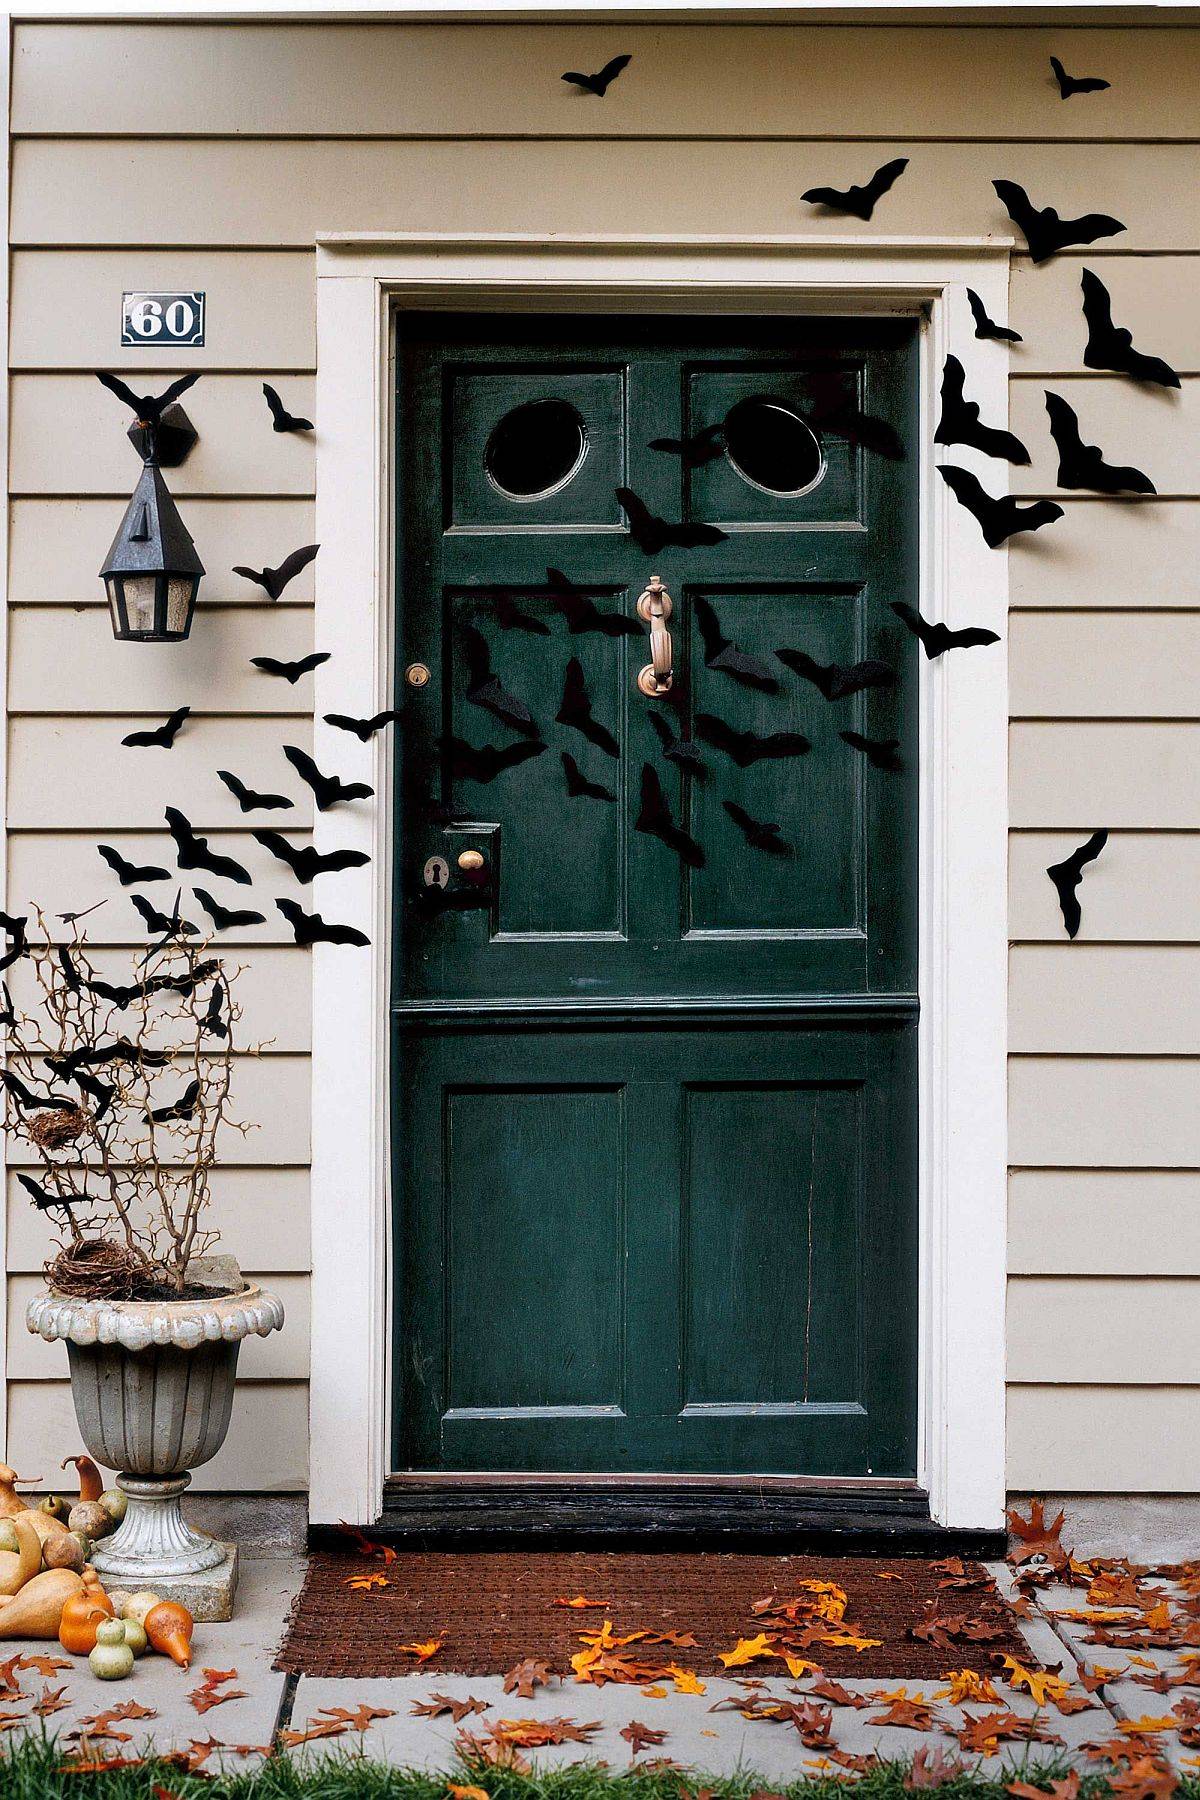 Bat cut-outs and pumpkins offer an easy way to decorate the entry in style